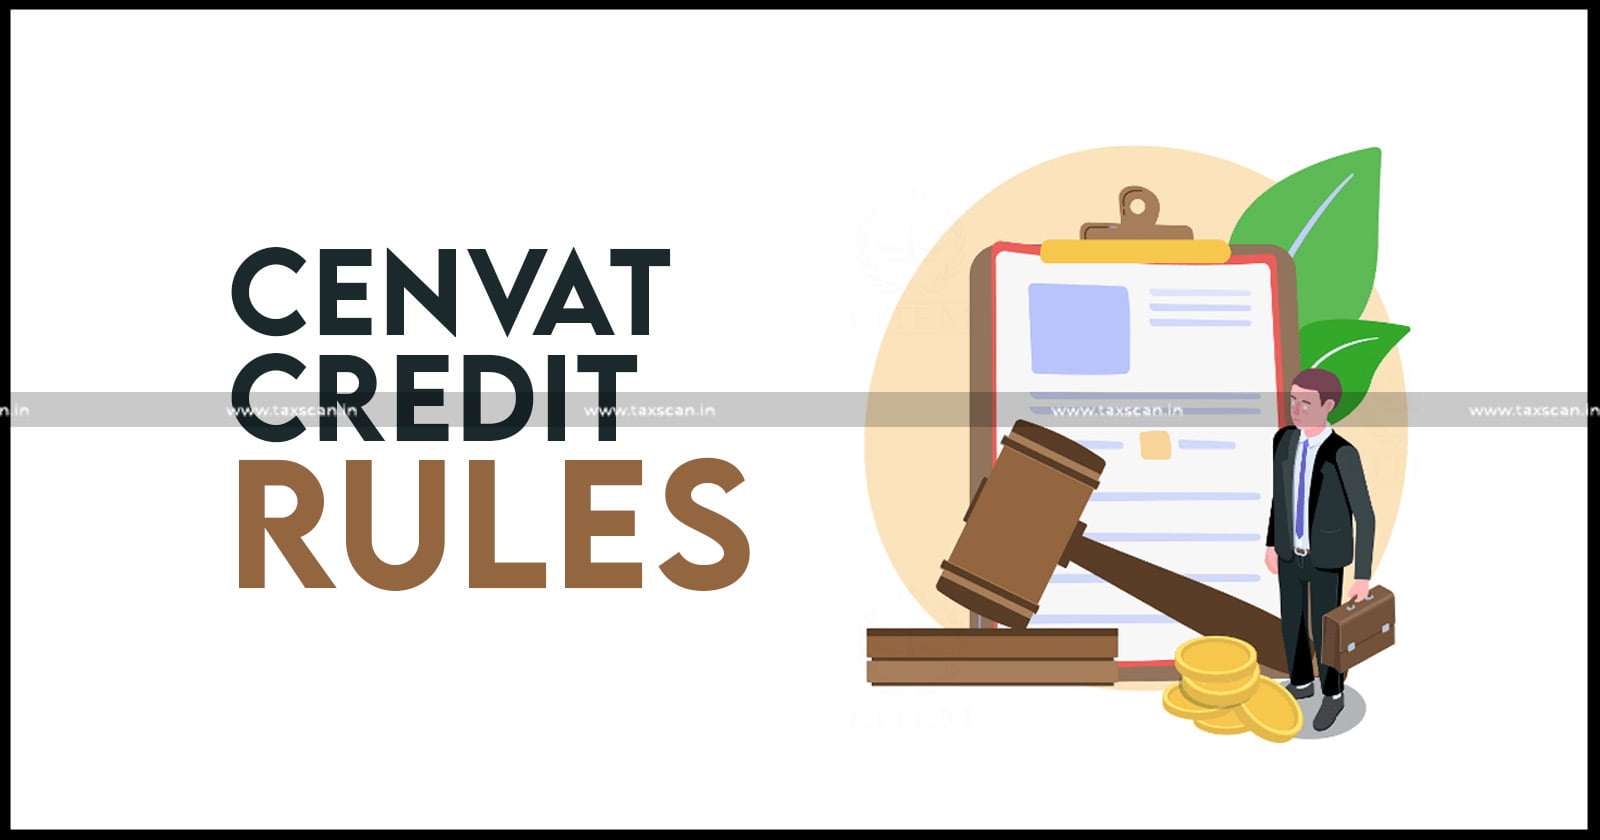 CENVAT Credit - CENVAT Credit Allowable Even If Premises of Service Exported are Not Registered - Service Exported - Service - CENVAT Credit Rules - CESTAT - Taxscan